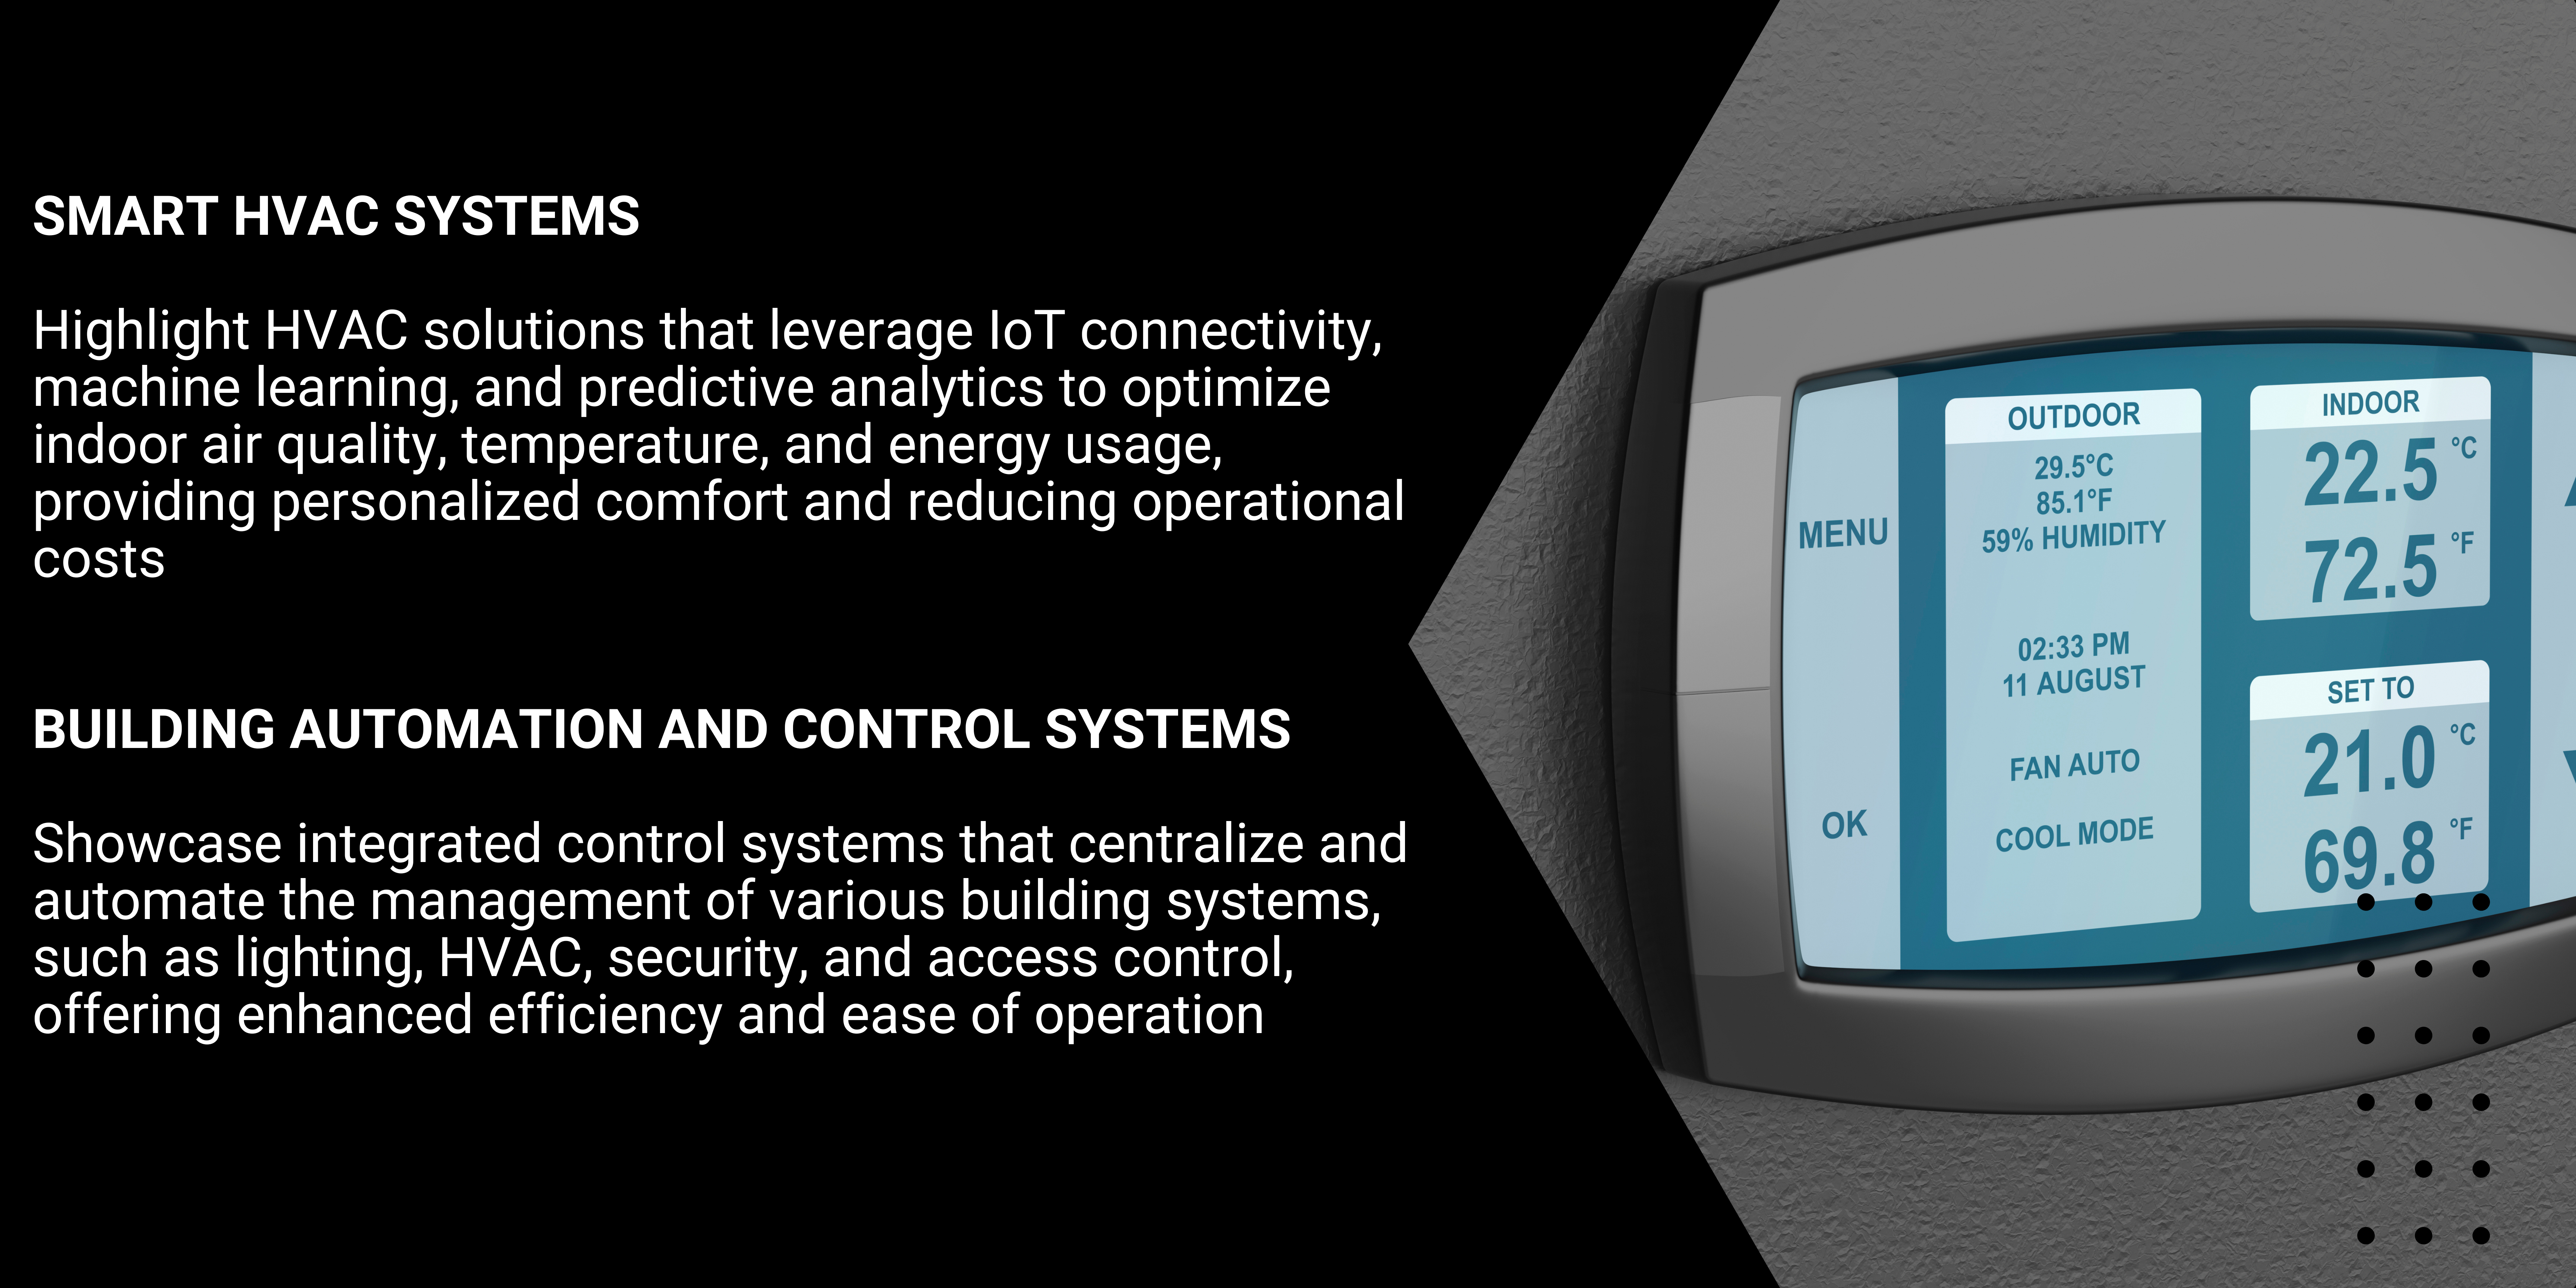 Smart HVAC Systems and Building Automation and Control Systems